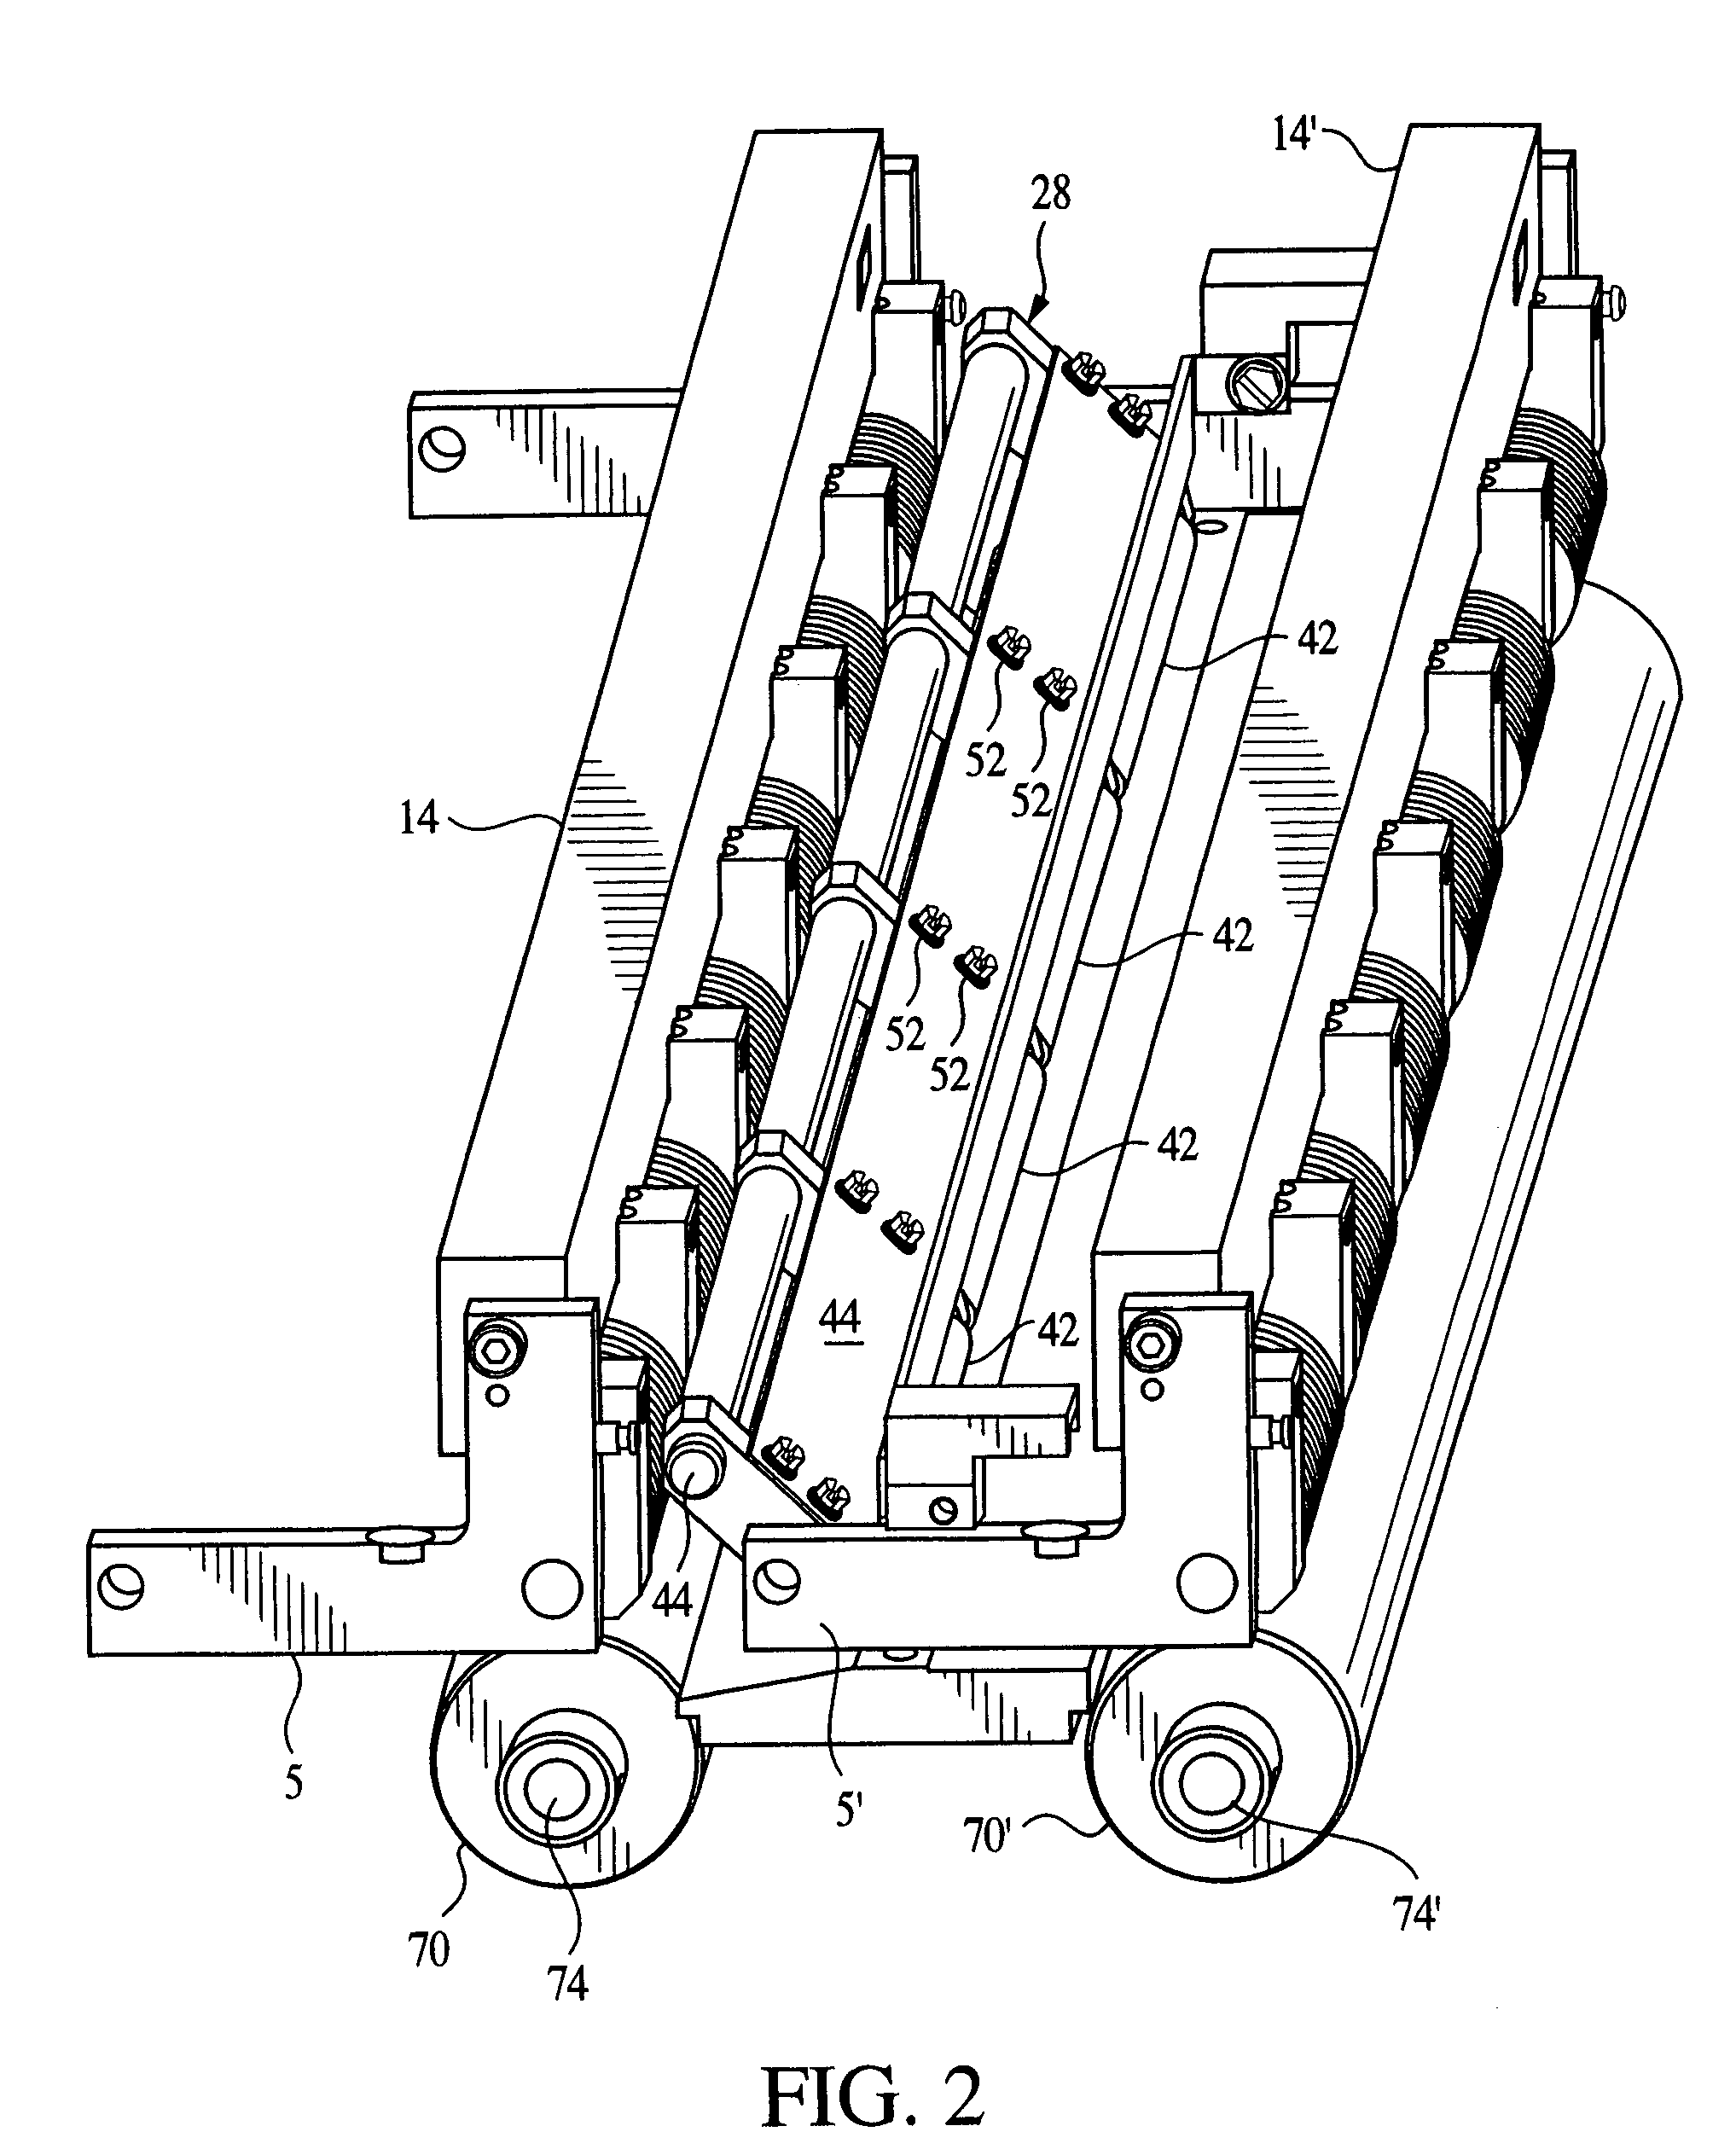 System and method for sheet transporting using dual capstan rollers